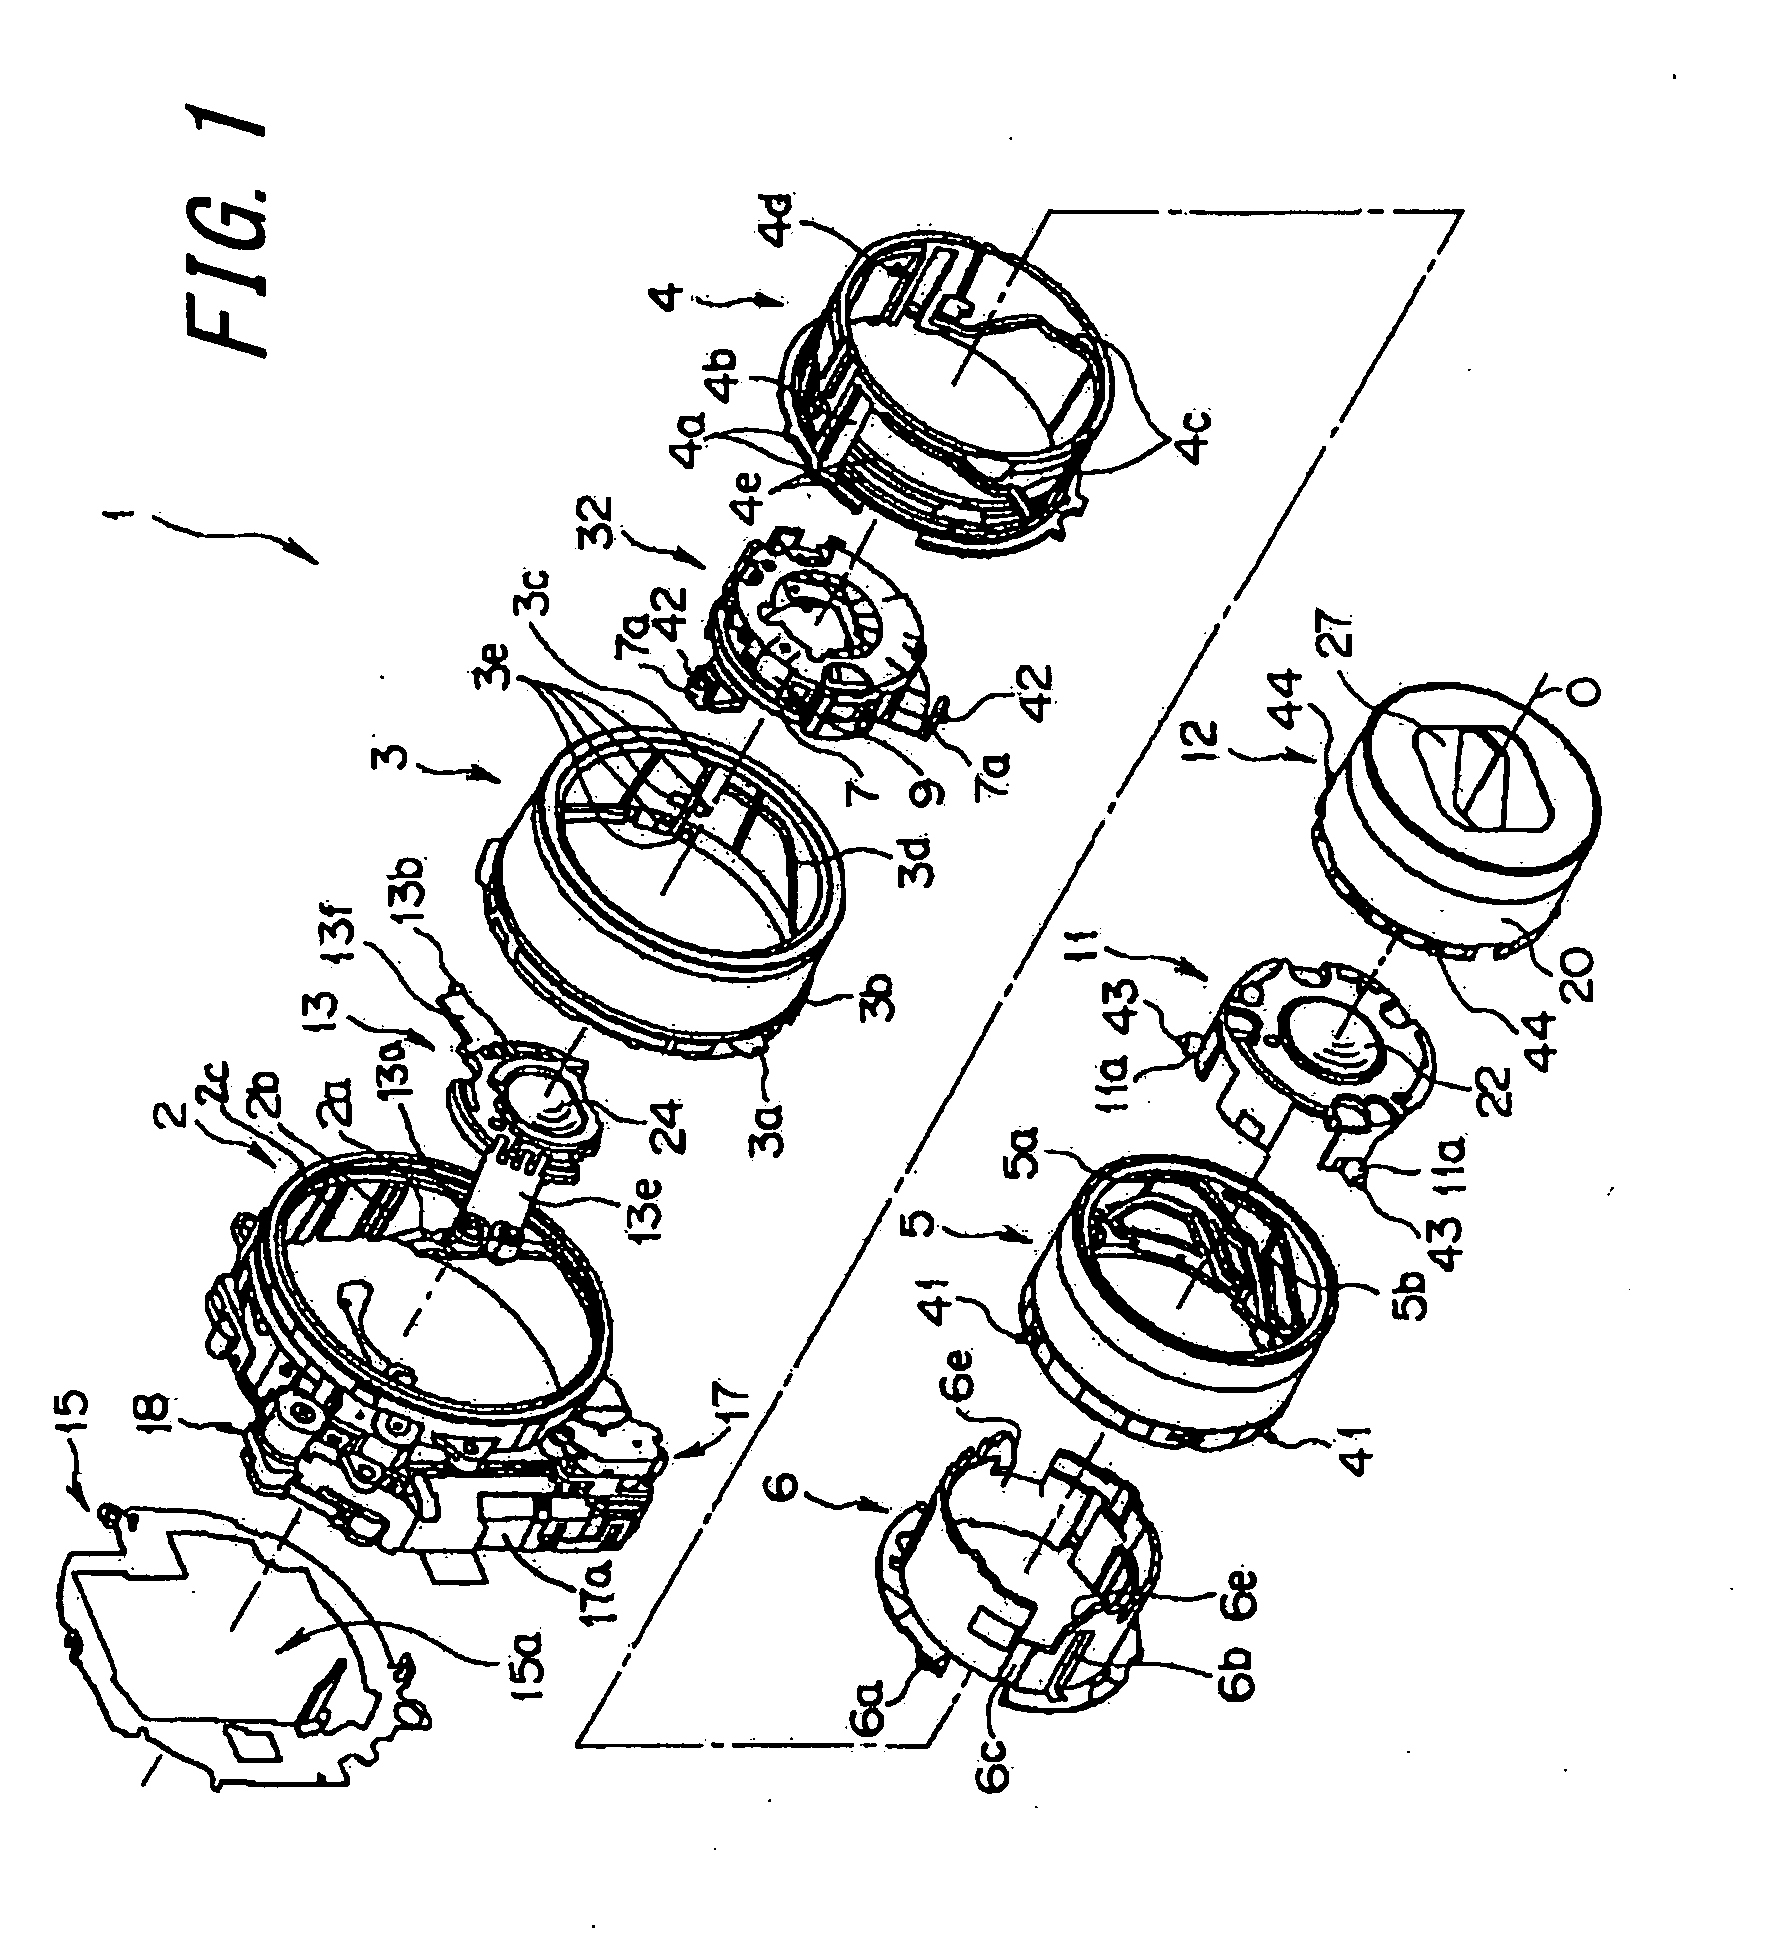 Lens barrel and electron imaging device using the same